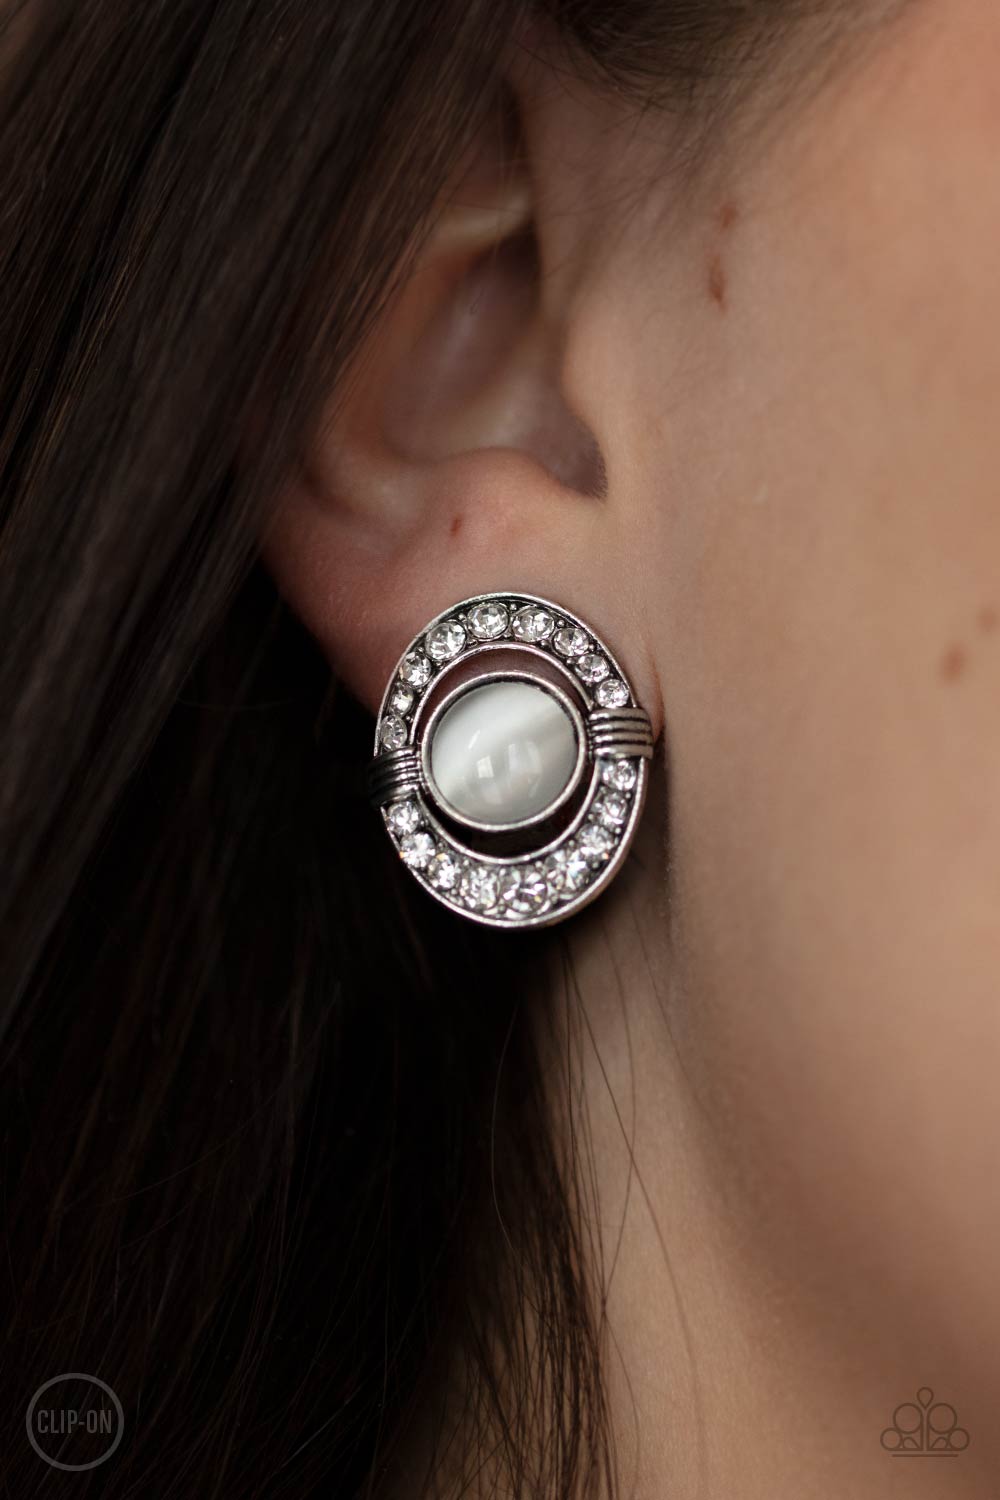 GLOW of Force White Cat's Eye and Rhinestone Clip-on Earrings - Paparazzi Accessories- lightbox - CarasShop.com - $5 Jewelry by Cara Jewels